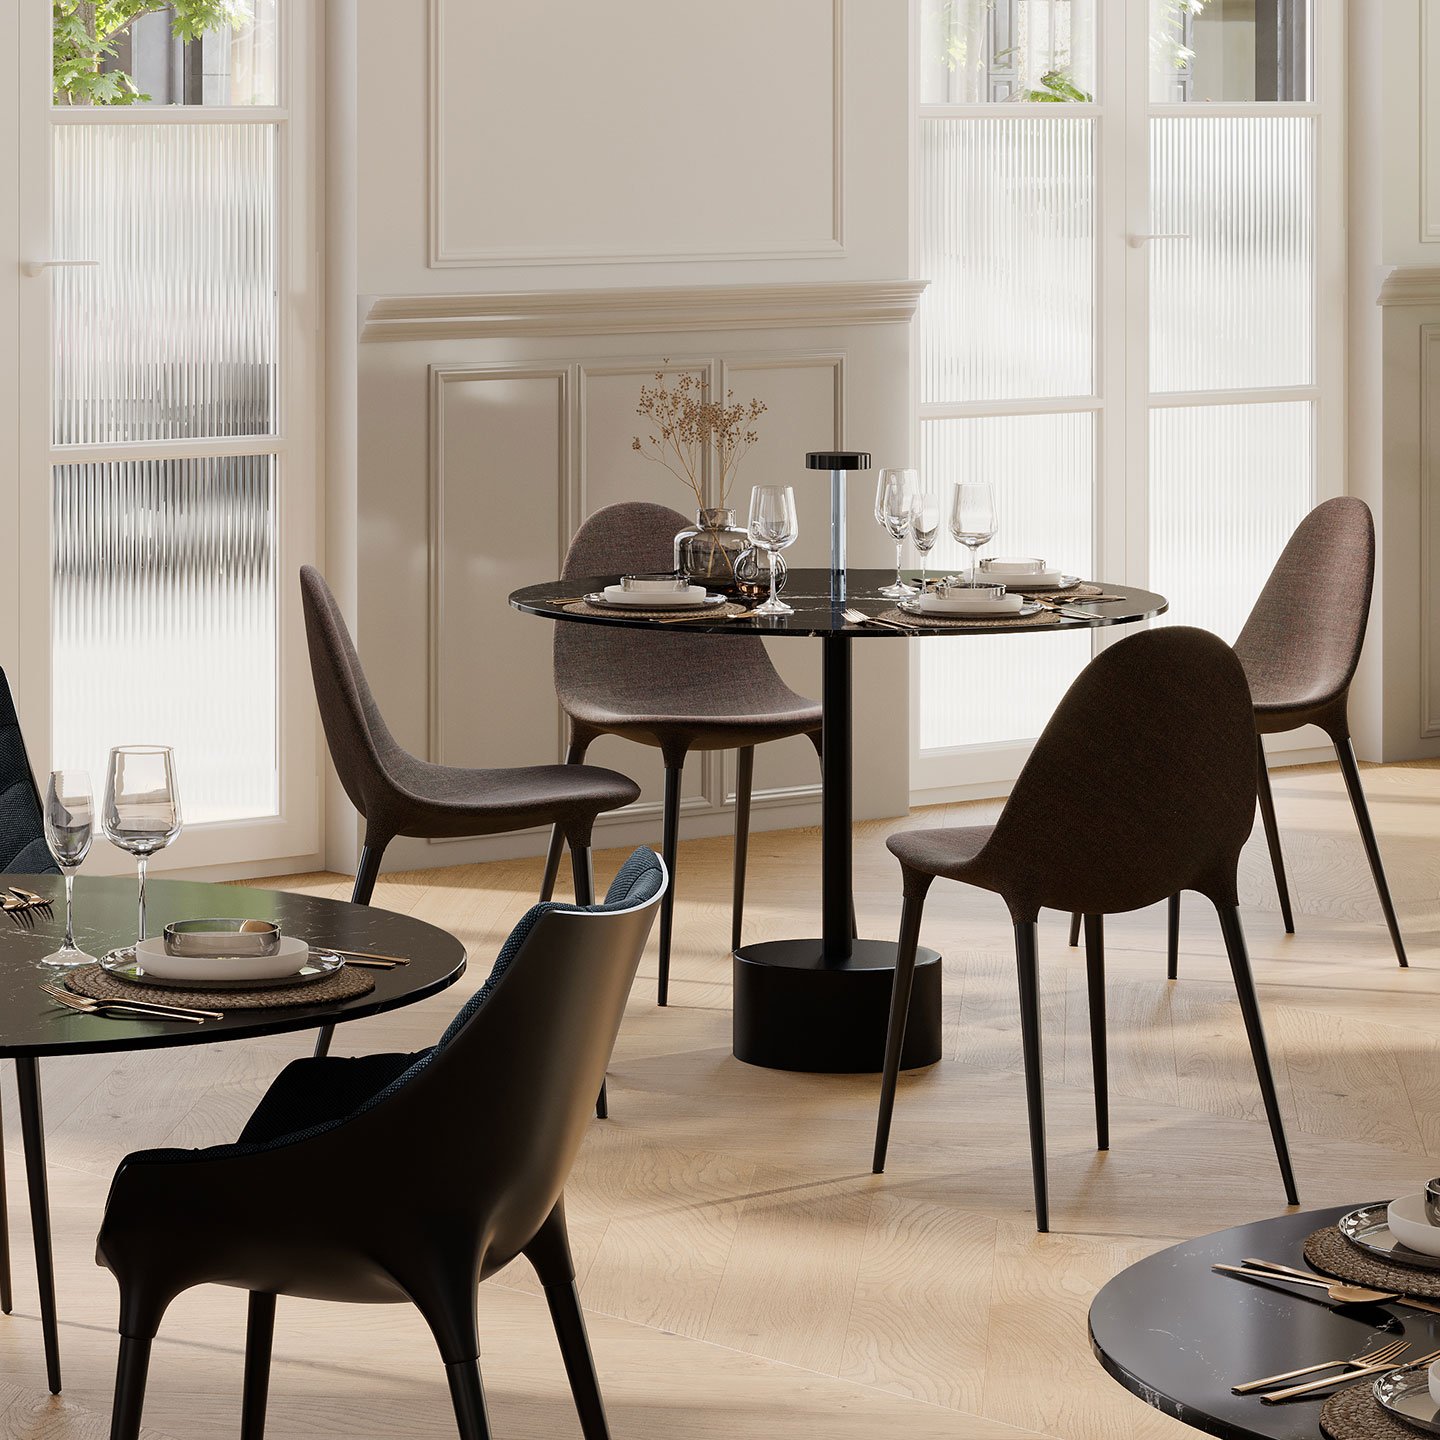 Haworth Caprice chairs in brown color around small round dining tables in a restaurant